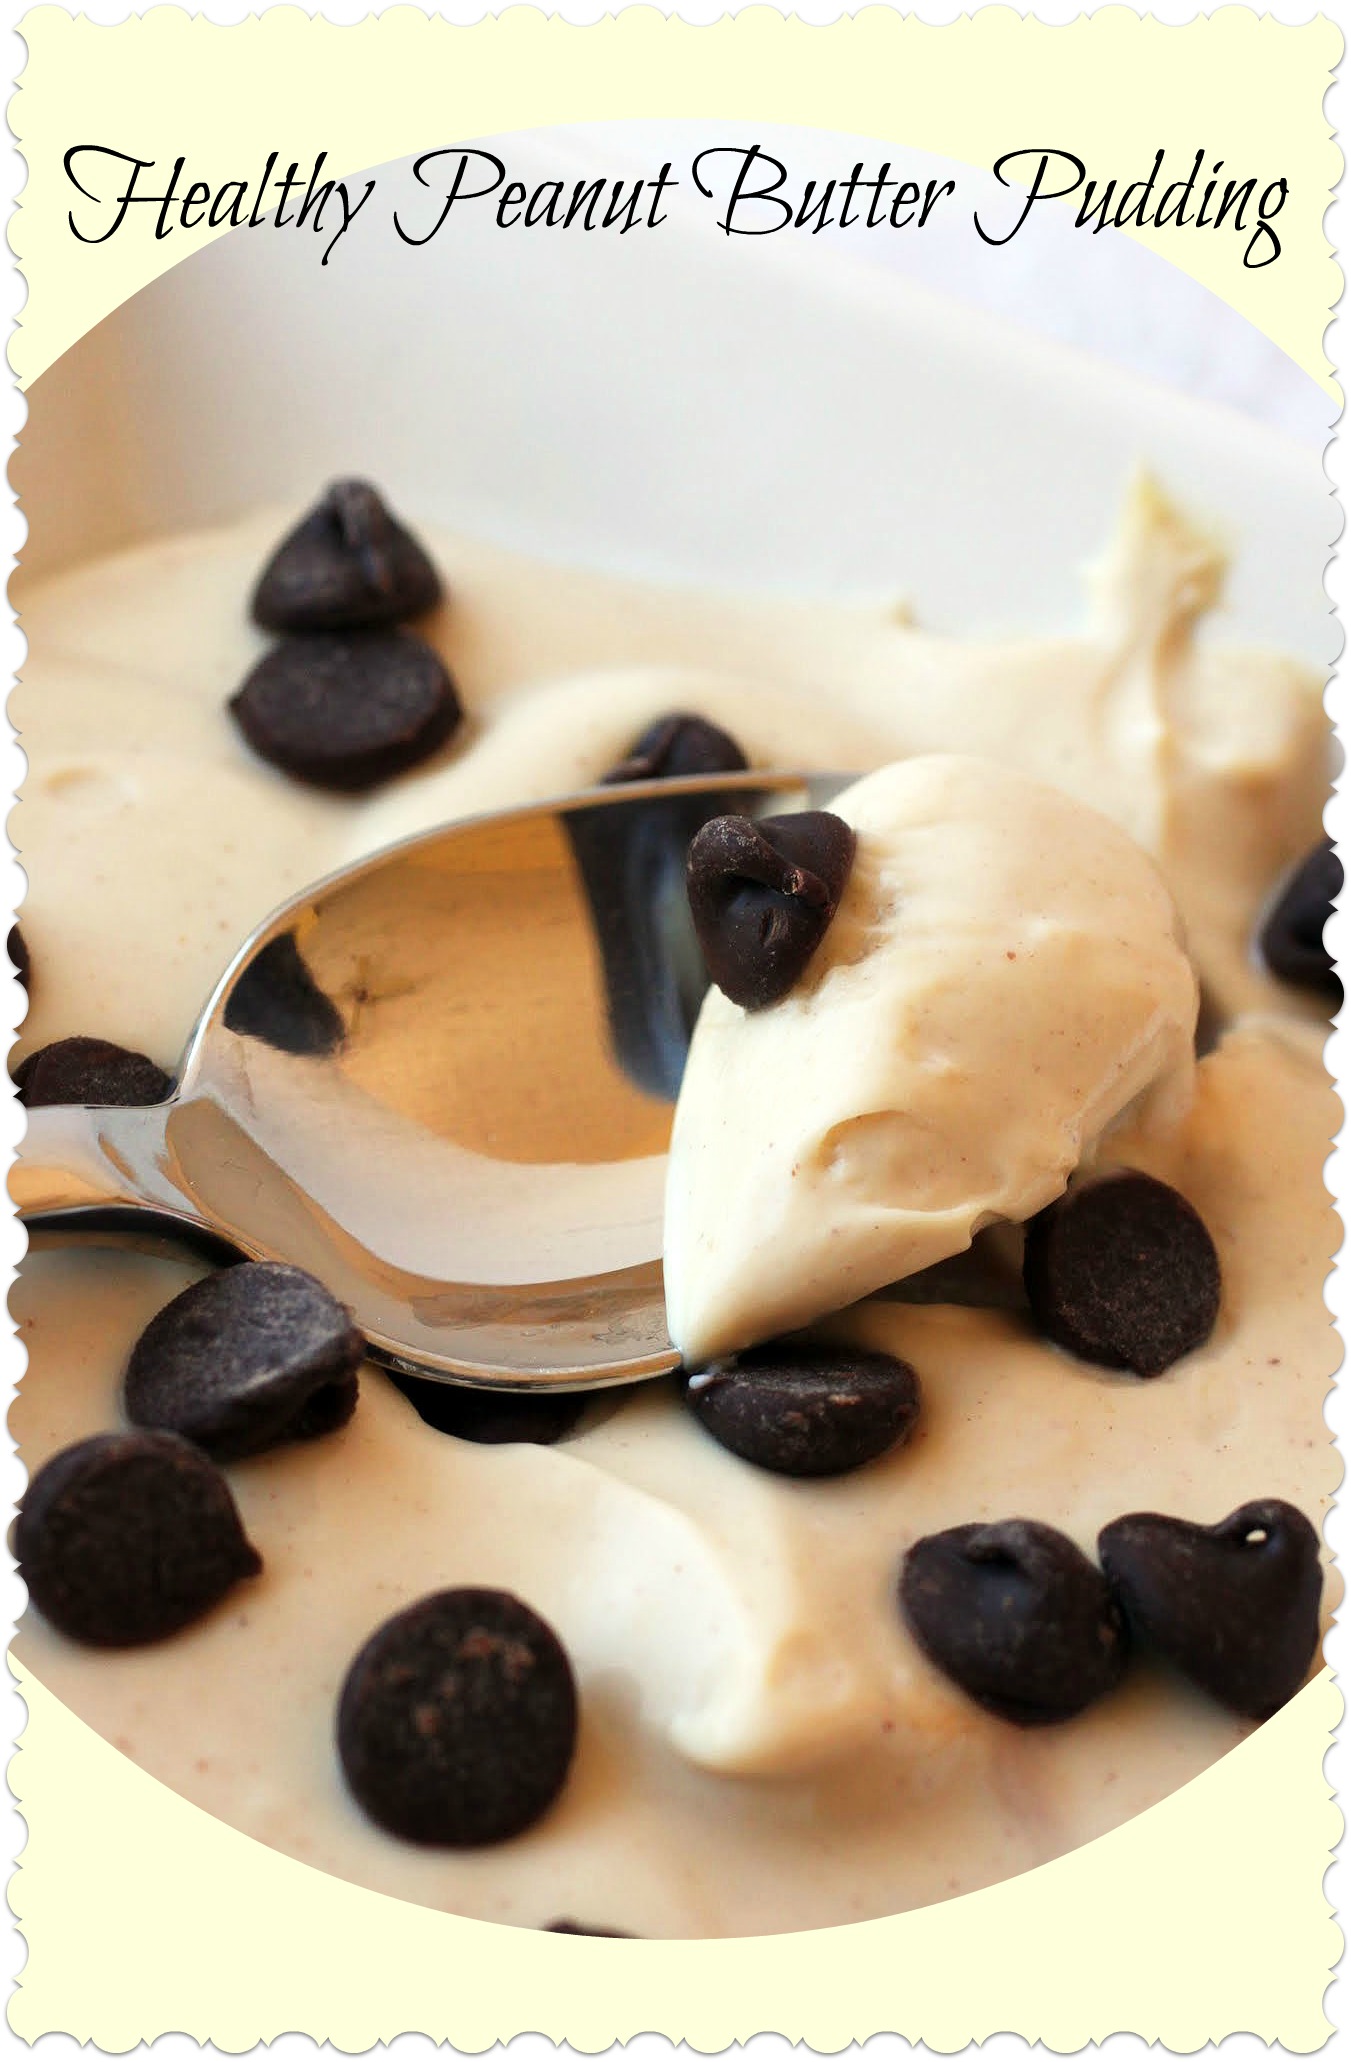 Healthy Peanut Butter Pudding